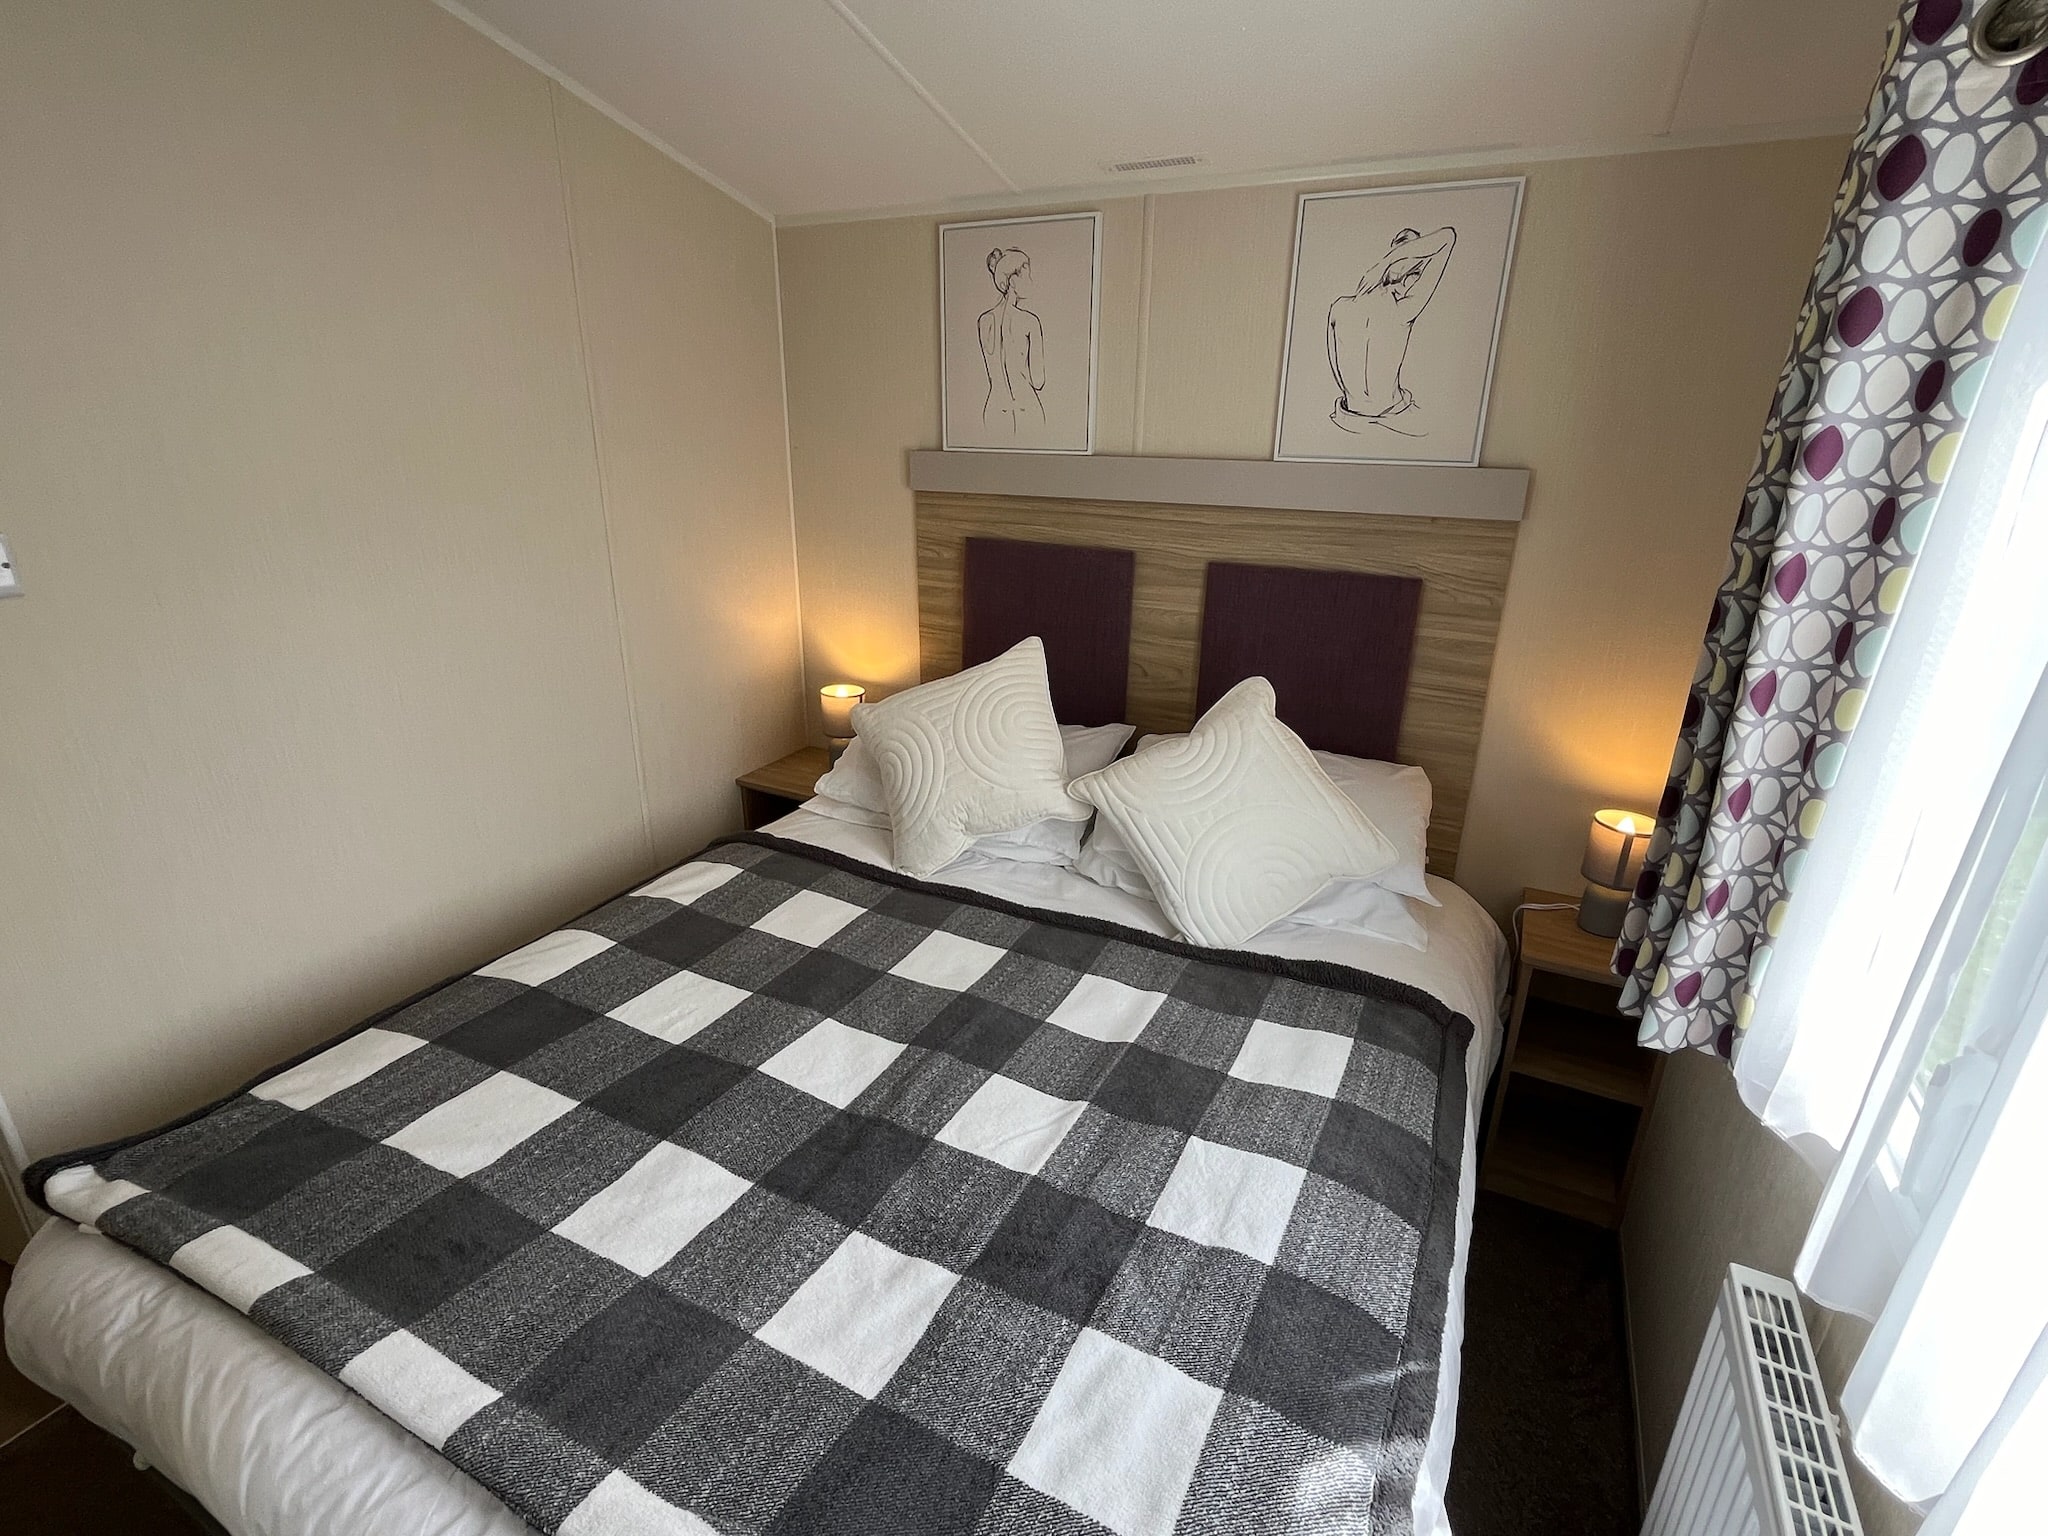 2019 Willerby Linwood for sale at Juliots Well Holiday park, Camelford, Cornwall